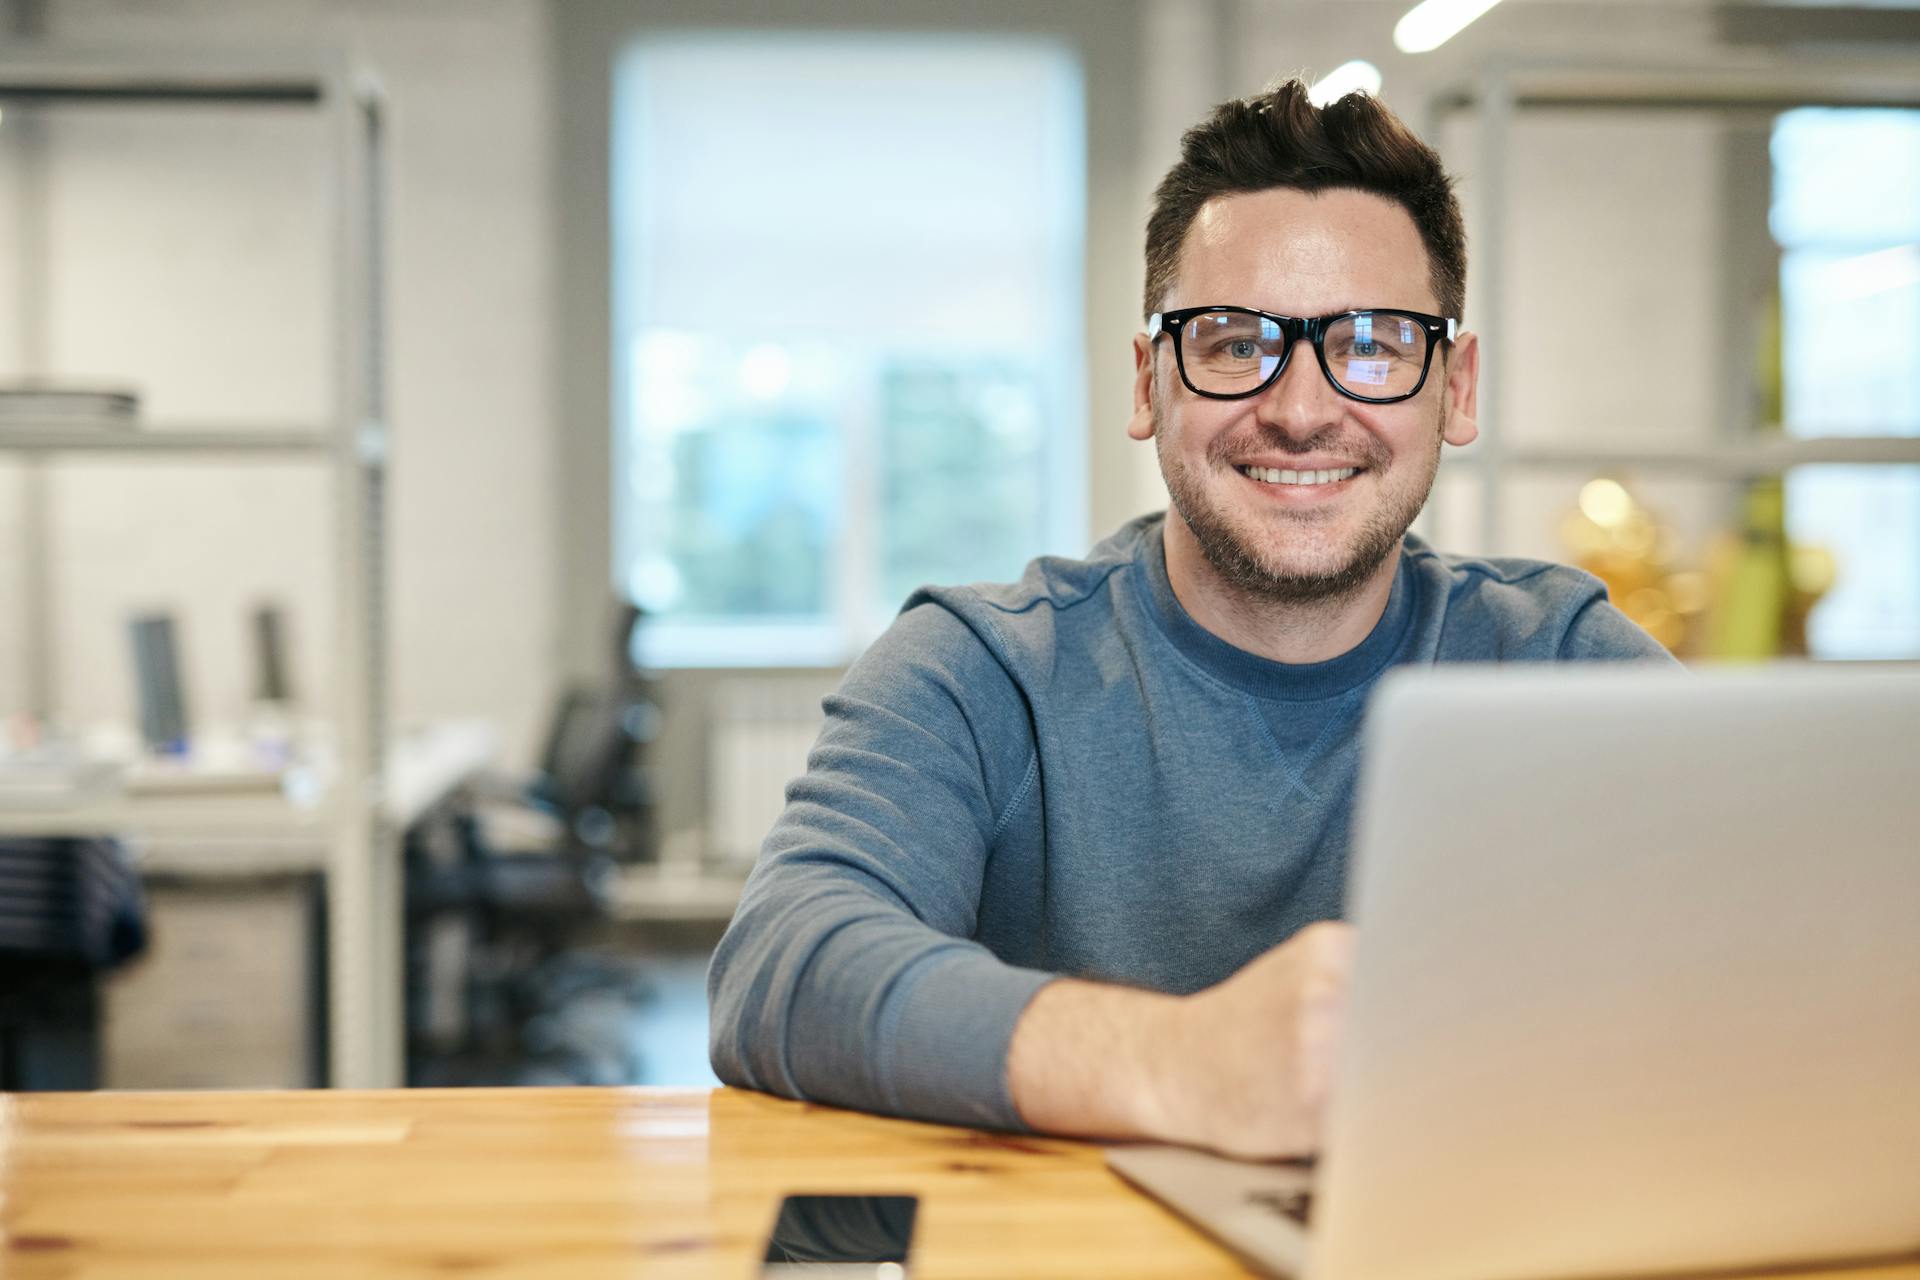 A man wearing glasses and smiling | Source: Pexels